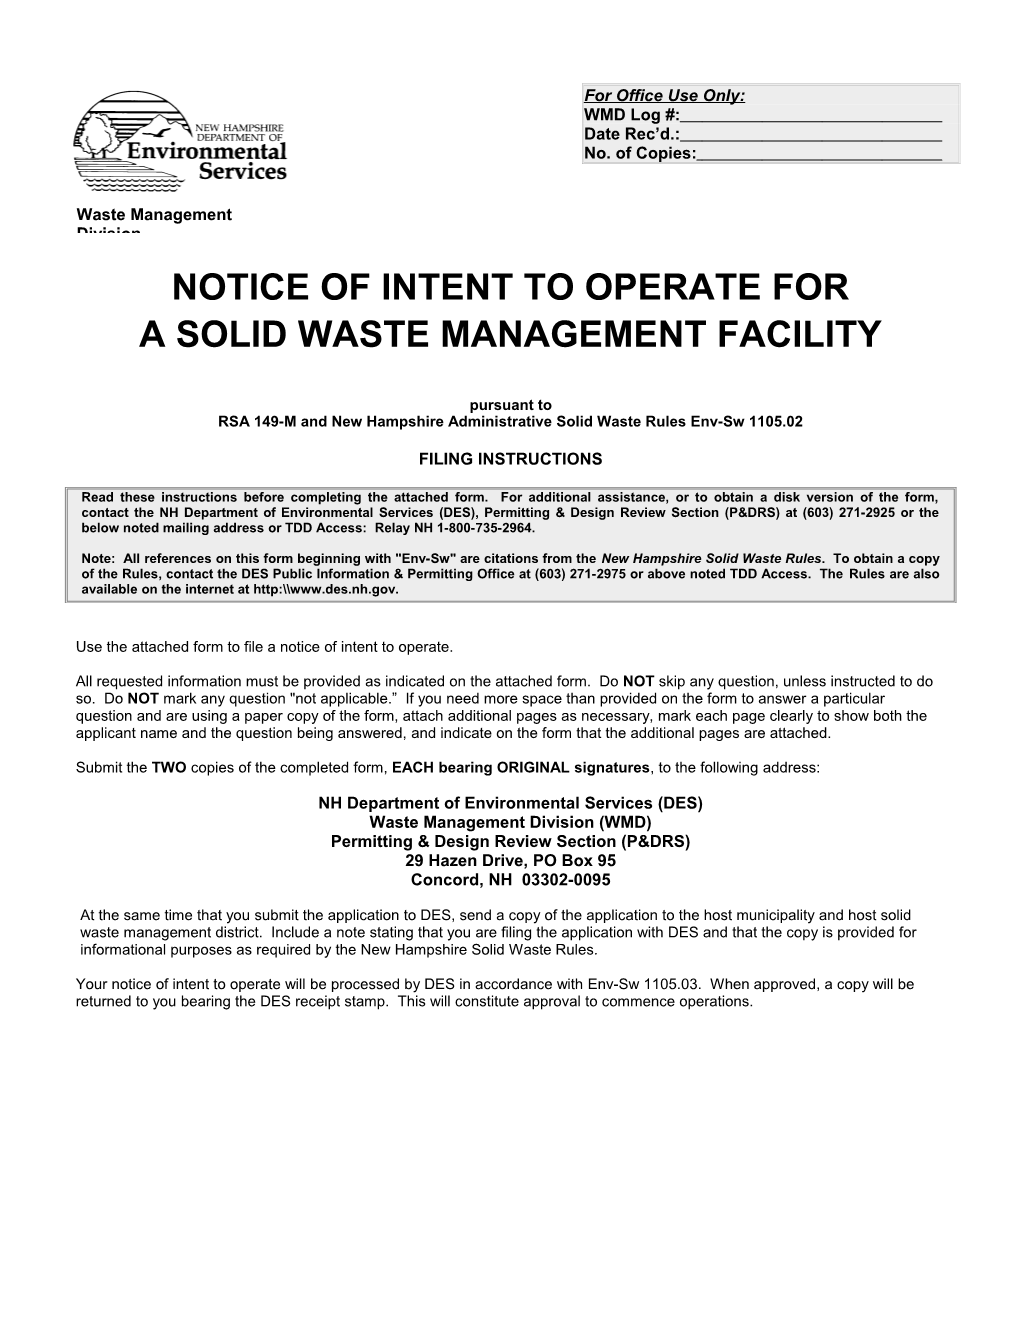 Notice of Intent to Operate For